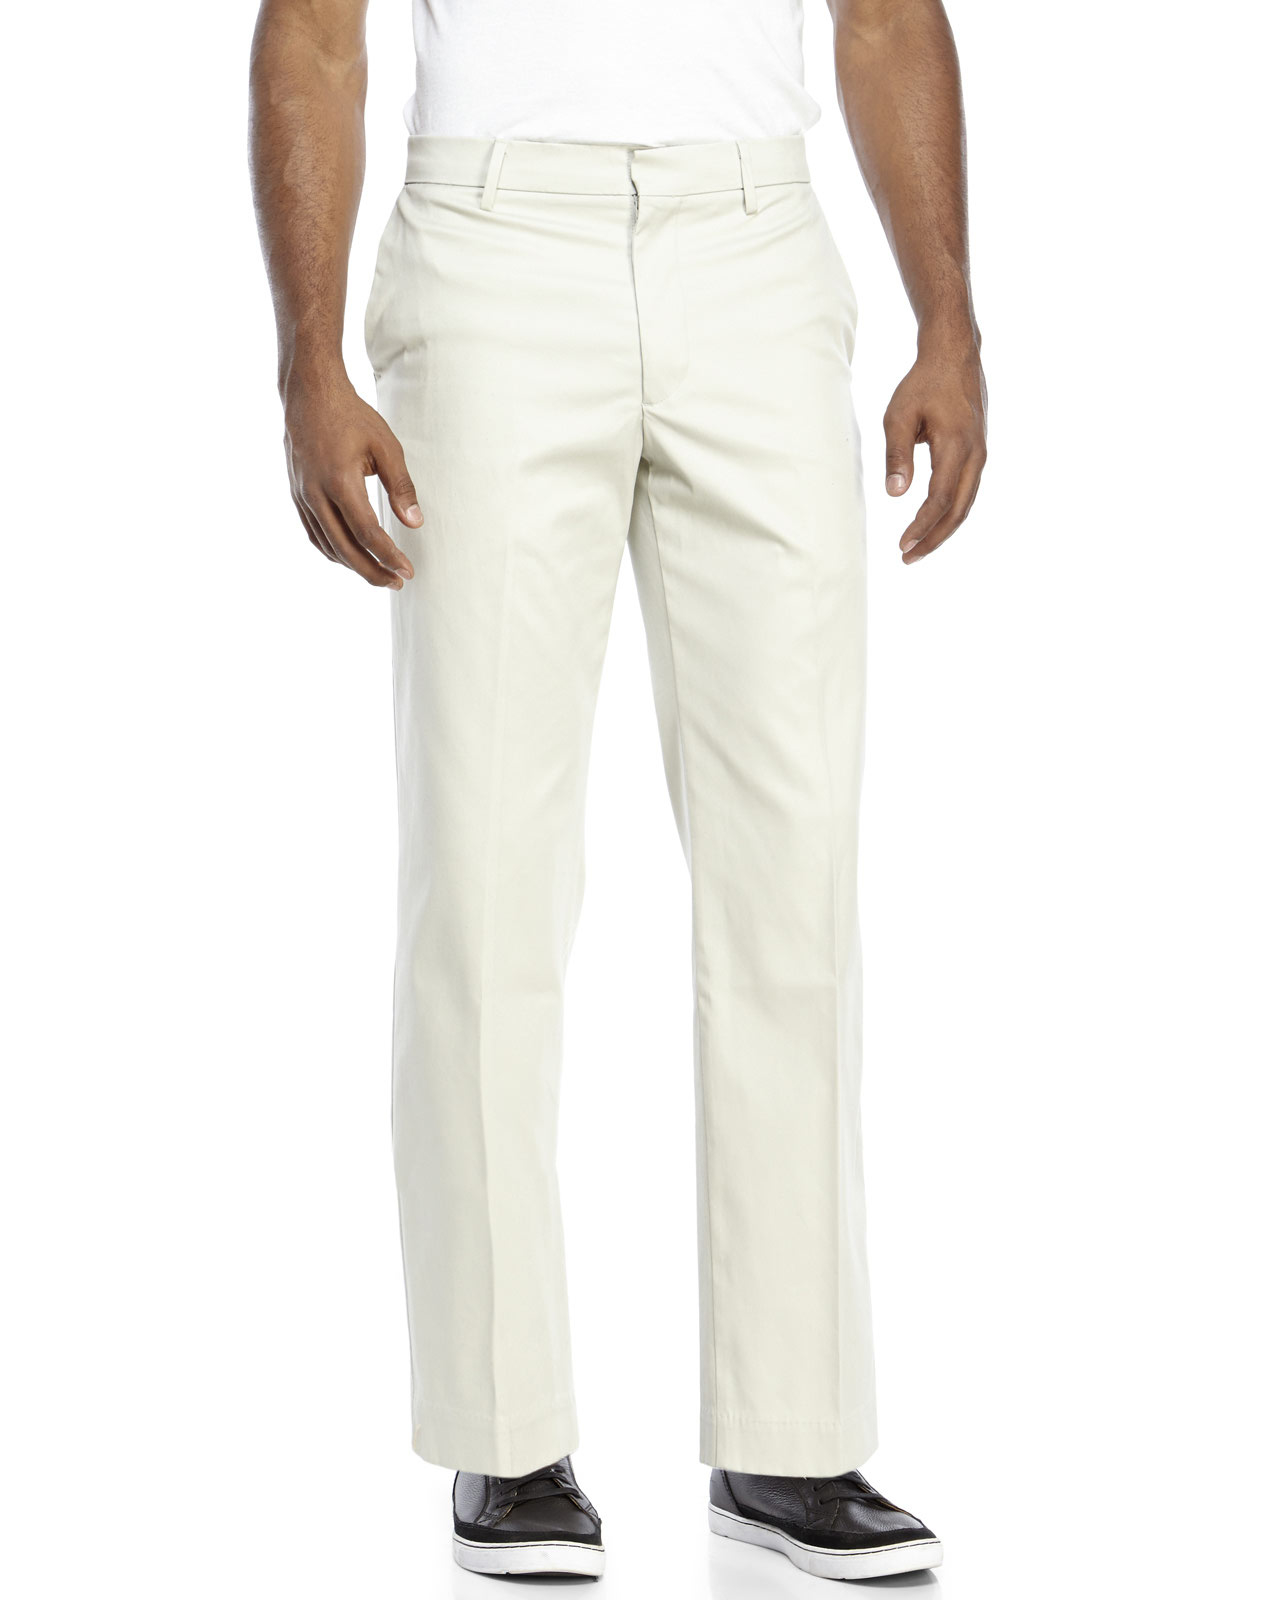 Lyst - Dockers Flat Front Straight Fit Iron Free Khaki Pants in White ...